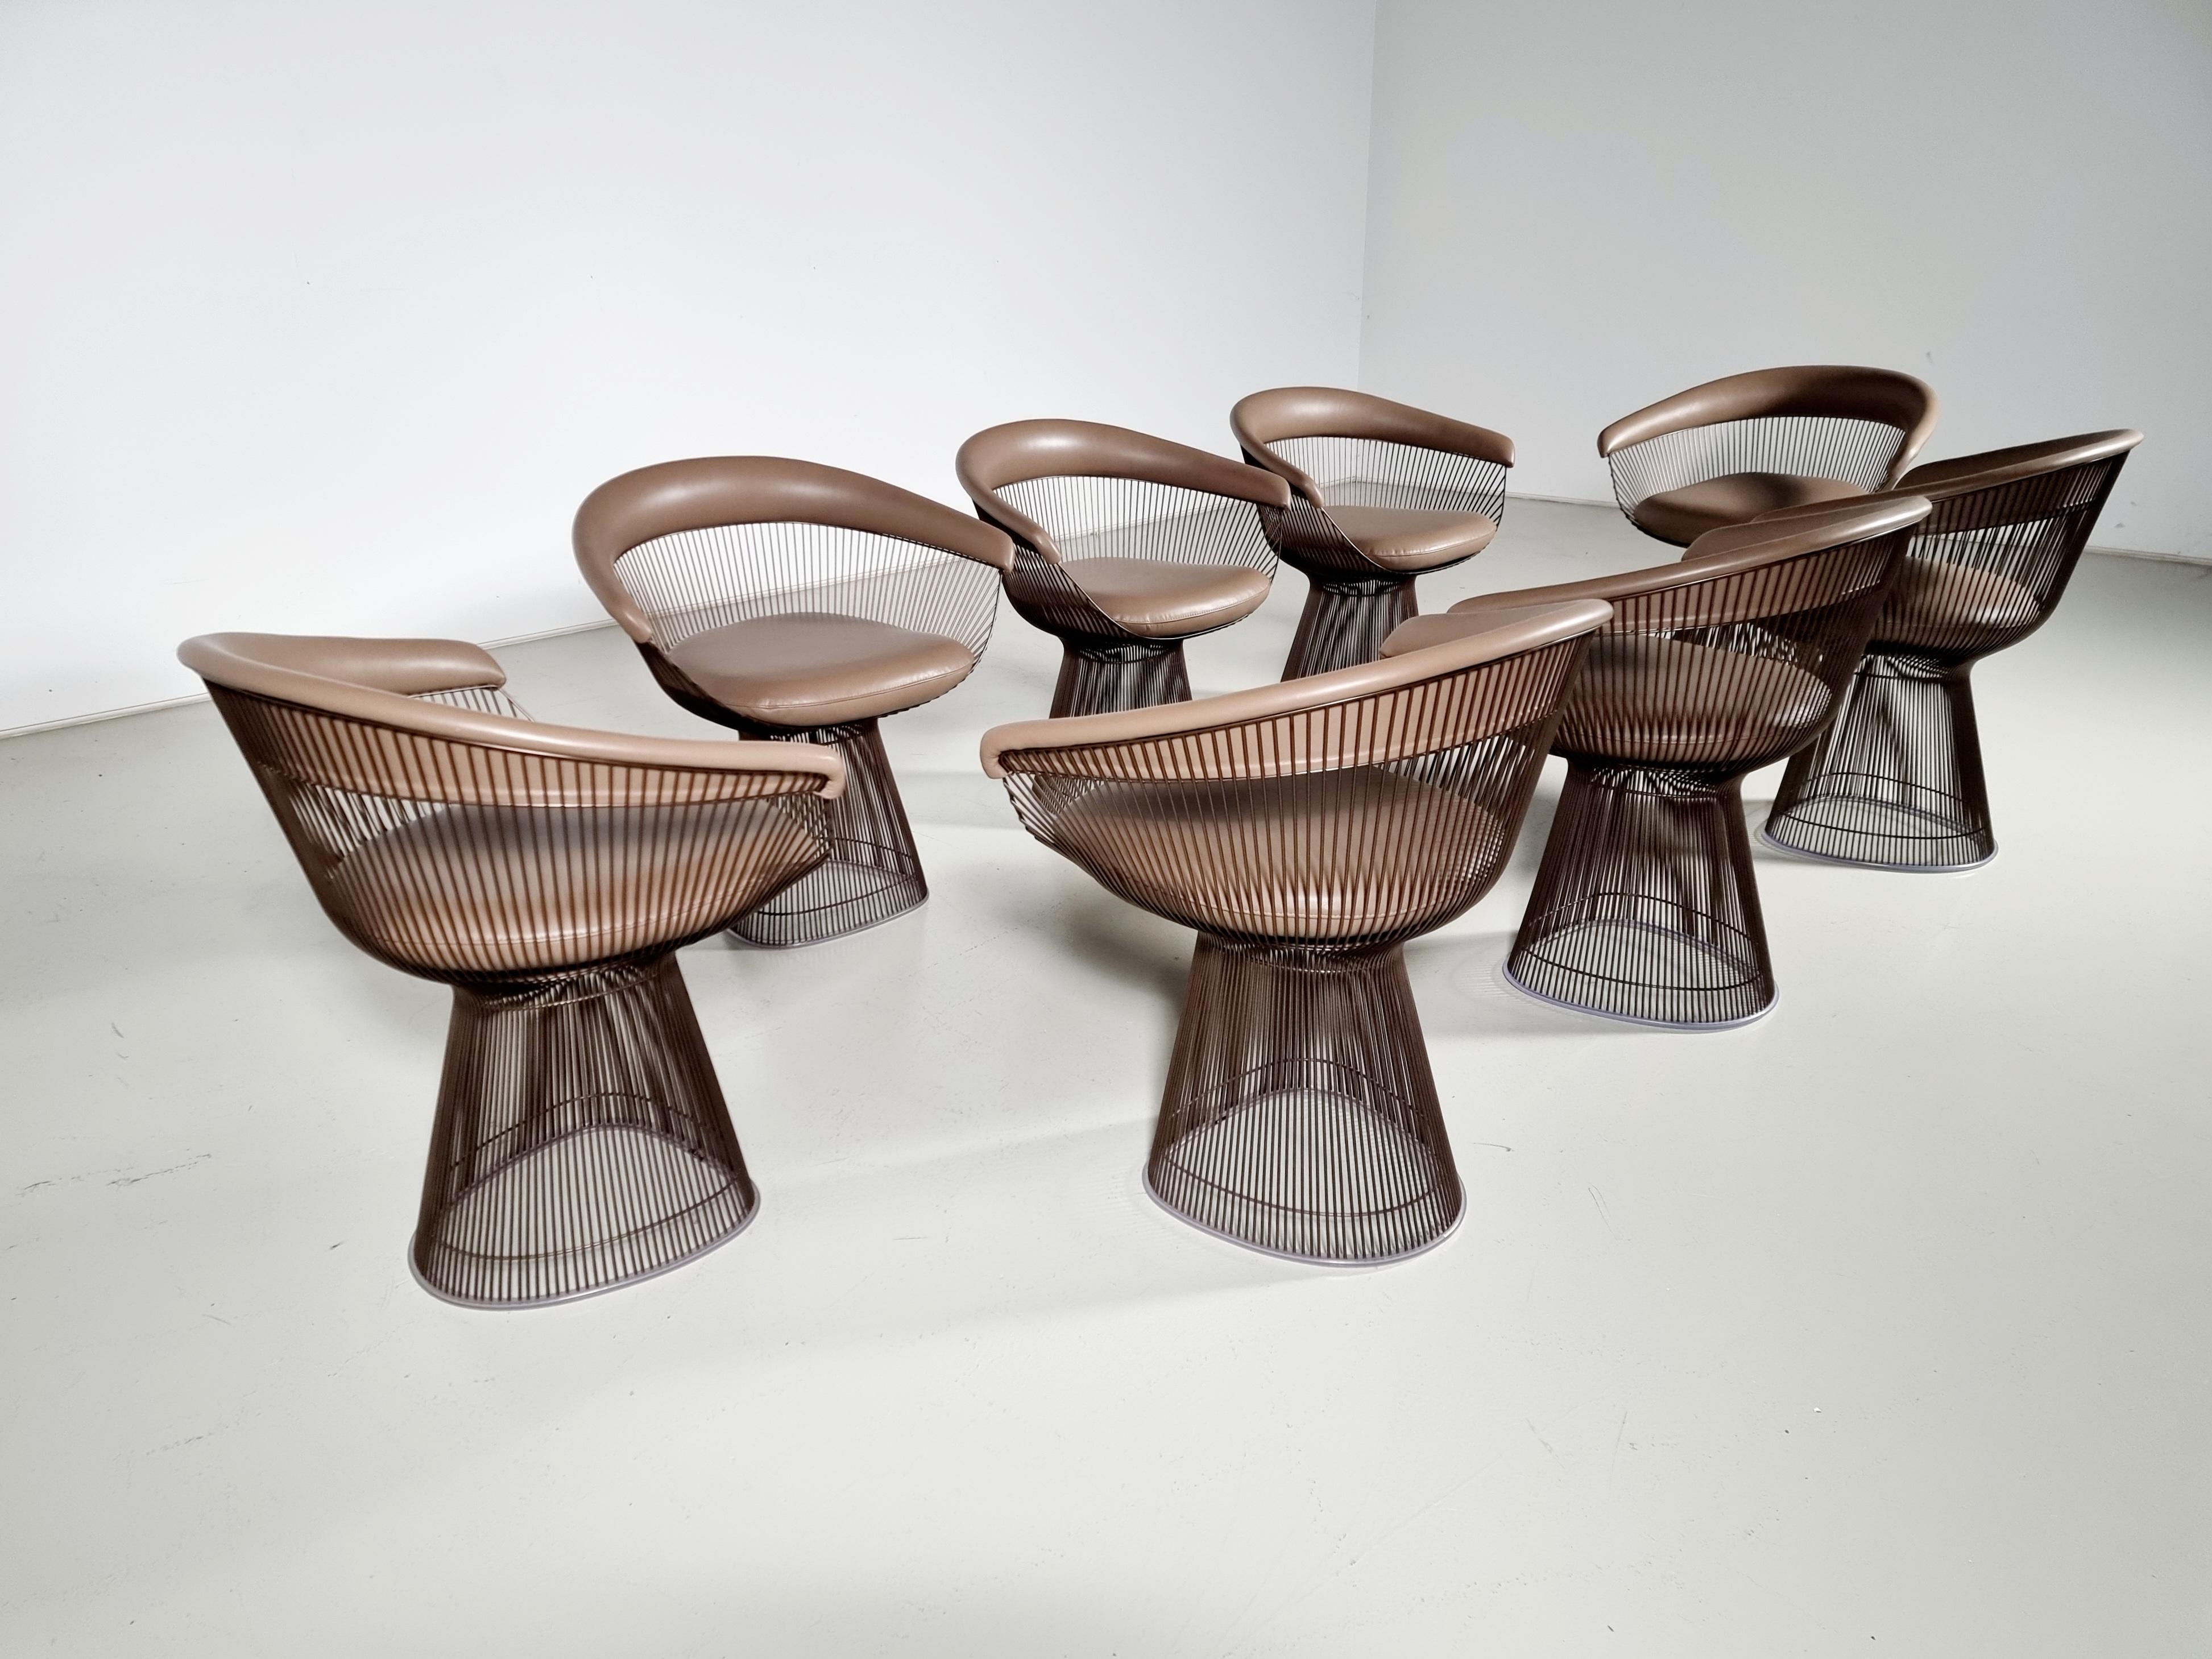 Warren Platner chairs, set of 8,  Knoll International

In 1966, the Platner Collection captured the “decorative, gentle, graceful' shapes that were beginning to infiltrate the modern vocabulary. The armchair, which can be used as a dining chair or